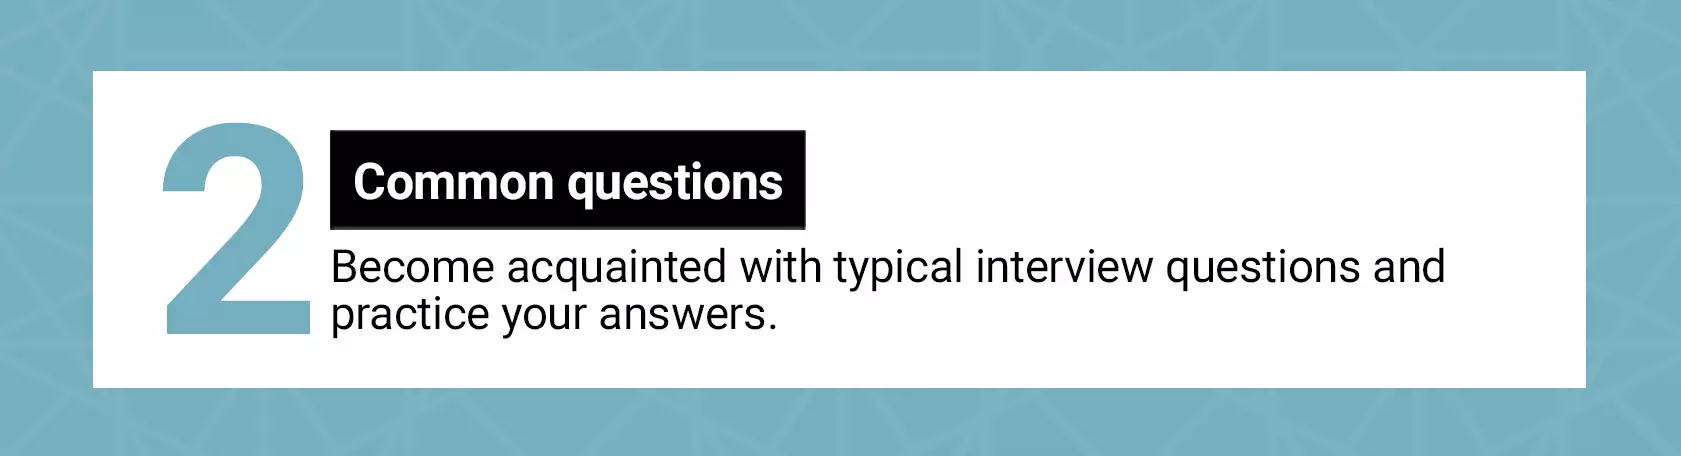 Common questions. Become acquainted with typical interview questions and practice your answers. 